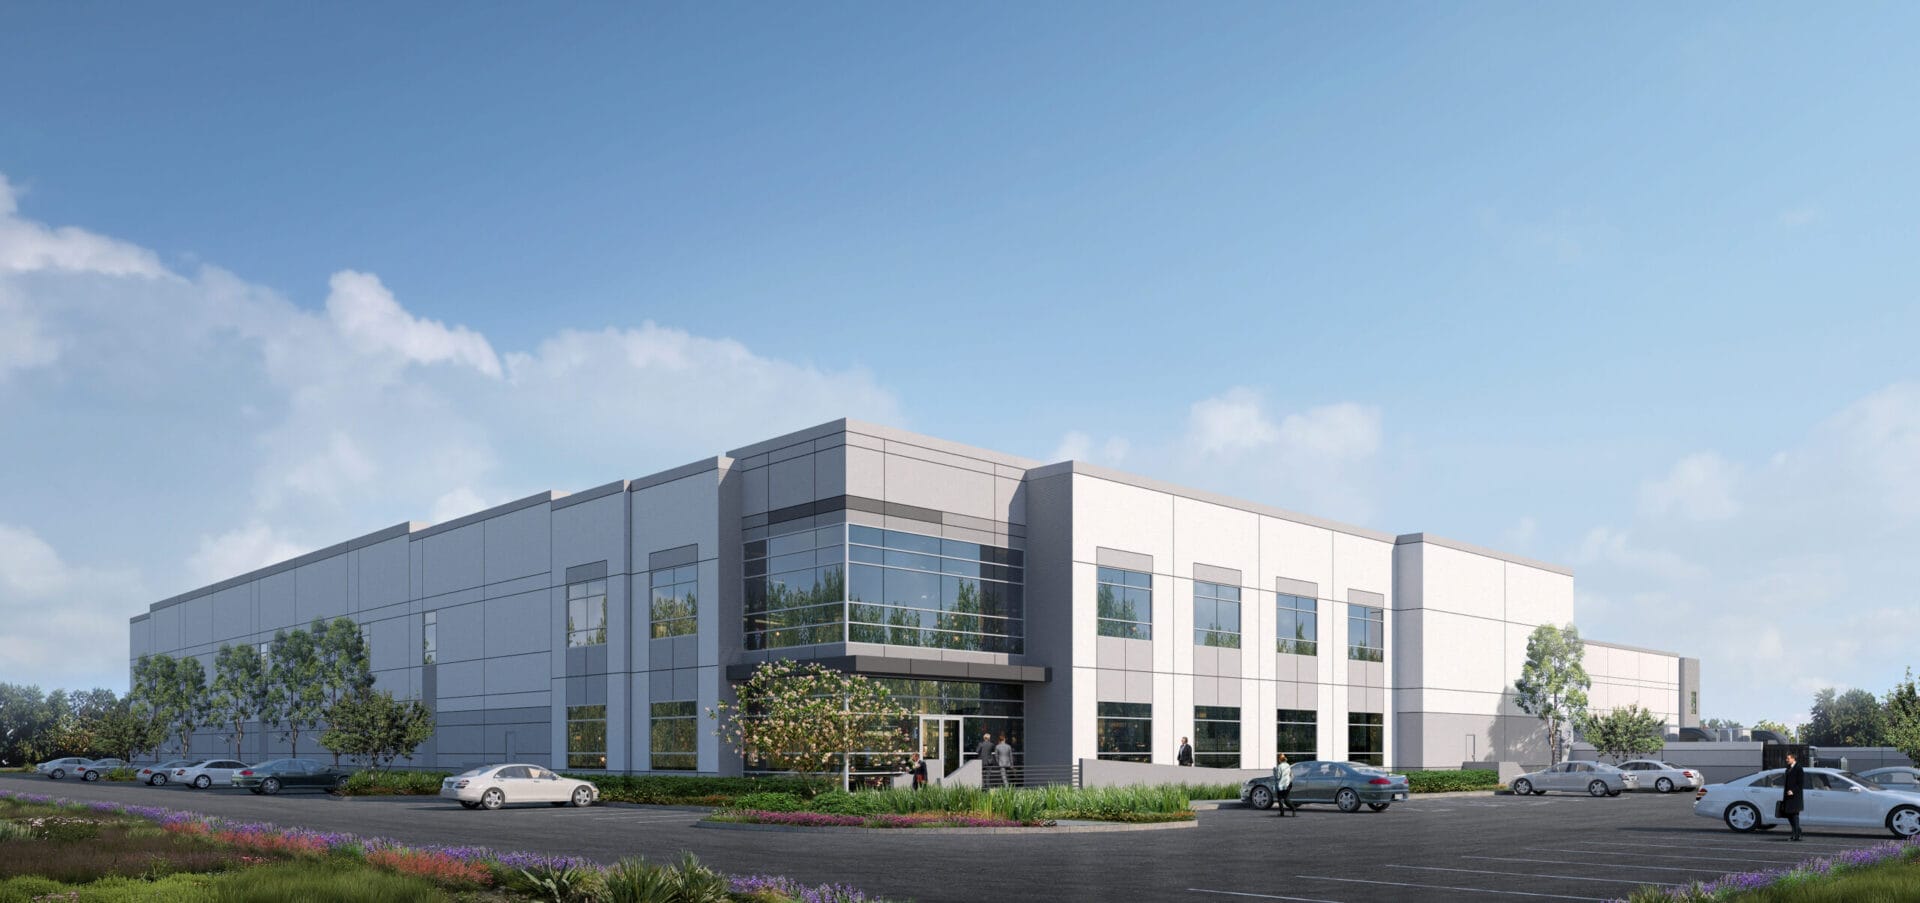 Bridge Lands $25 Million Loan for 190,000 SF Middlesex Co. Warehouse Project